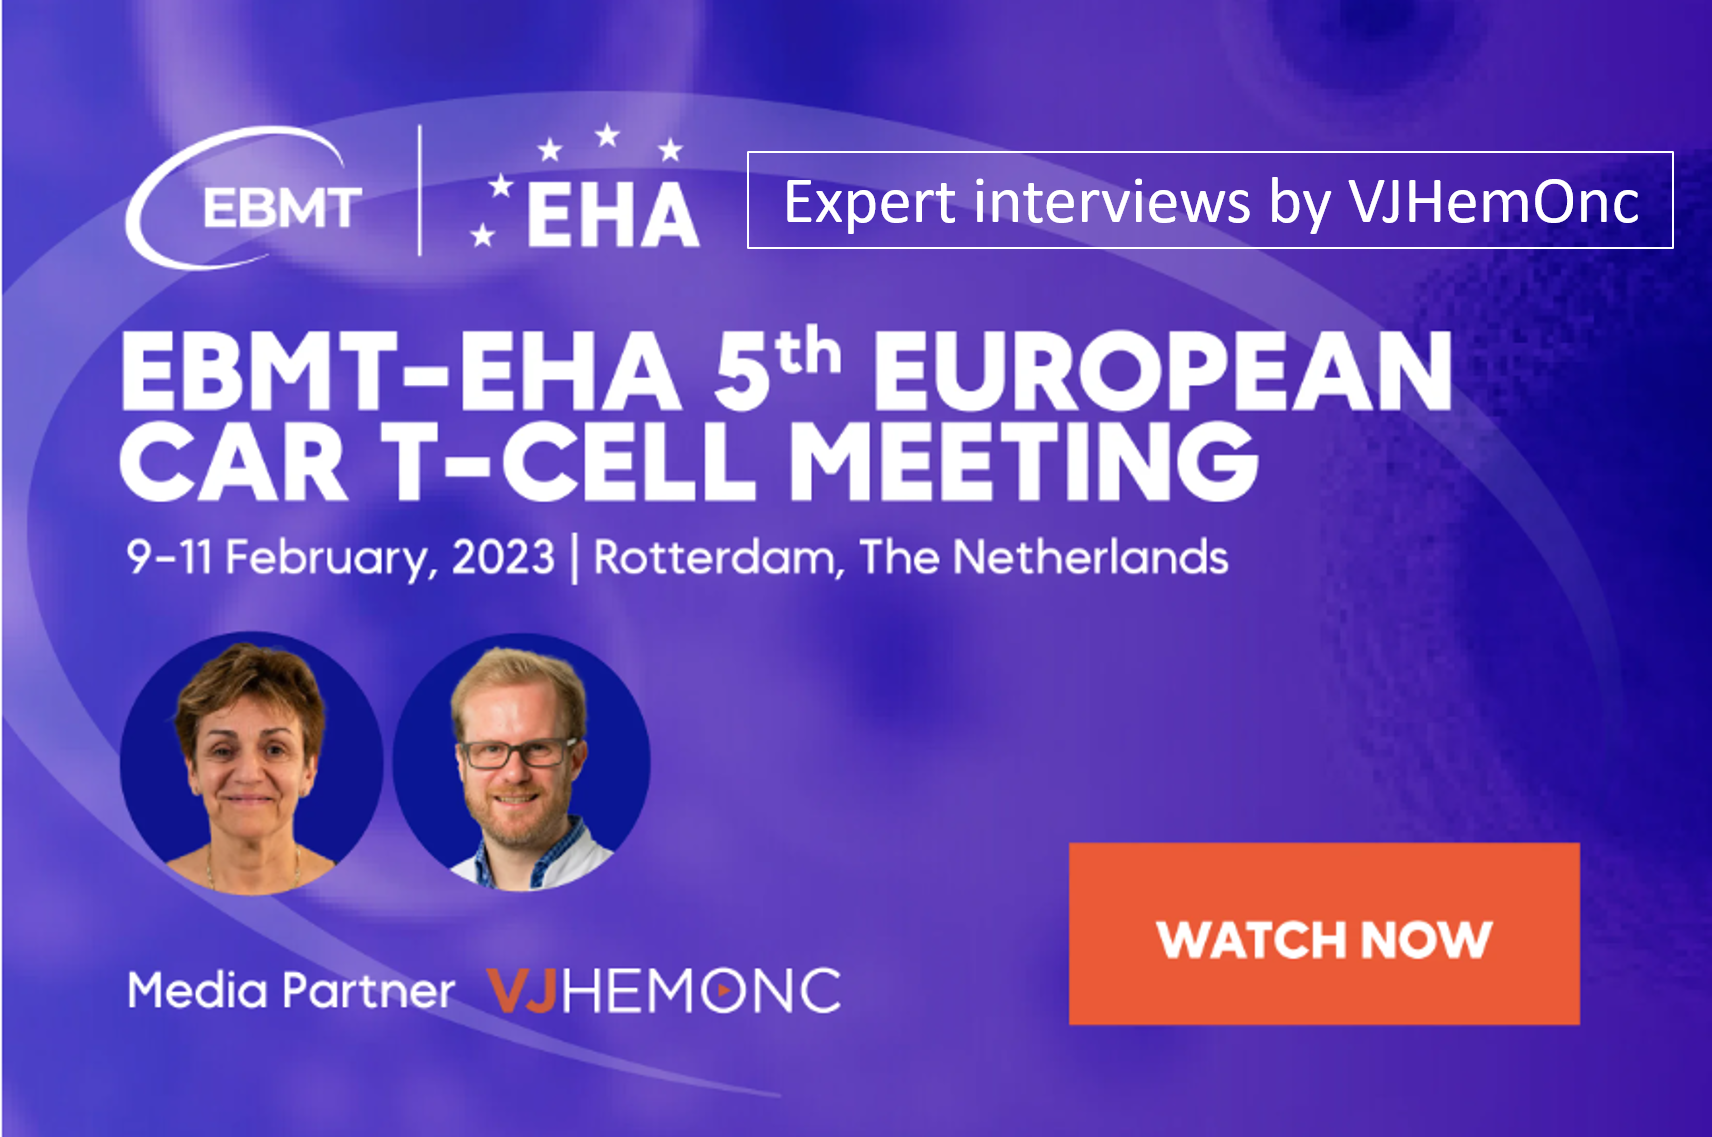 CAR T-cell Meeting_expert interviews by VJHemOnc